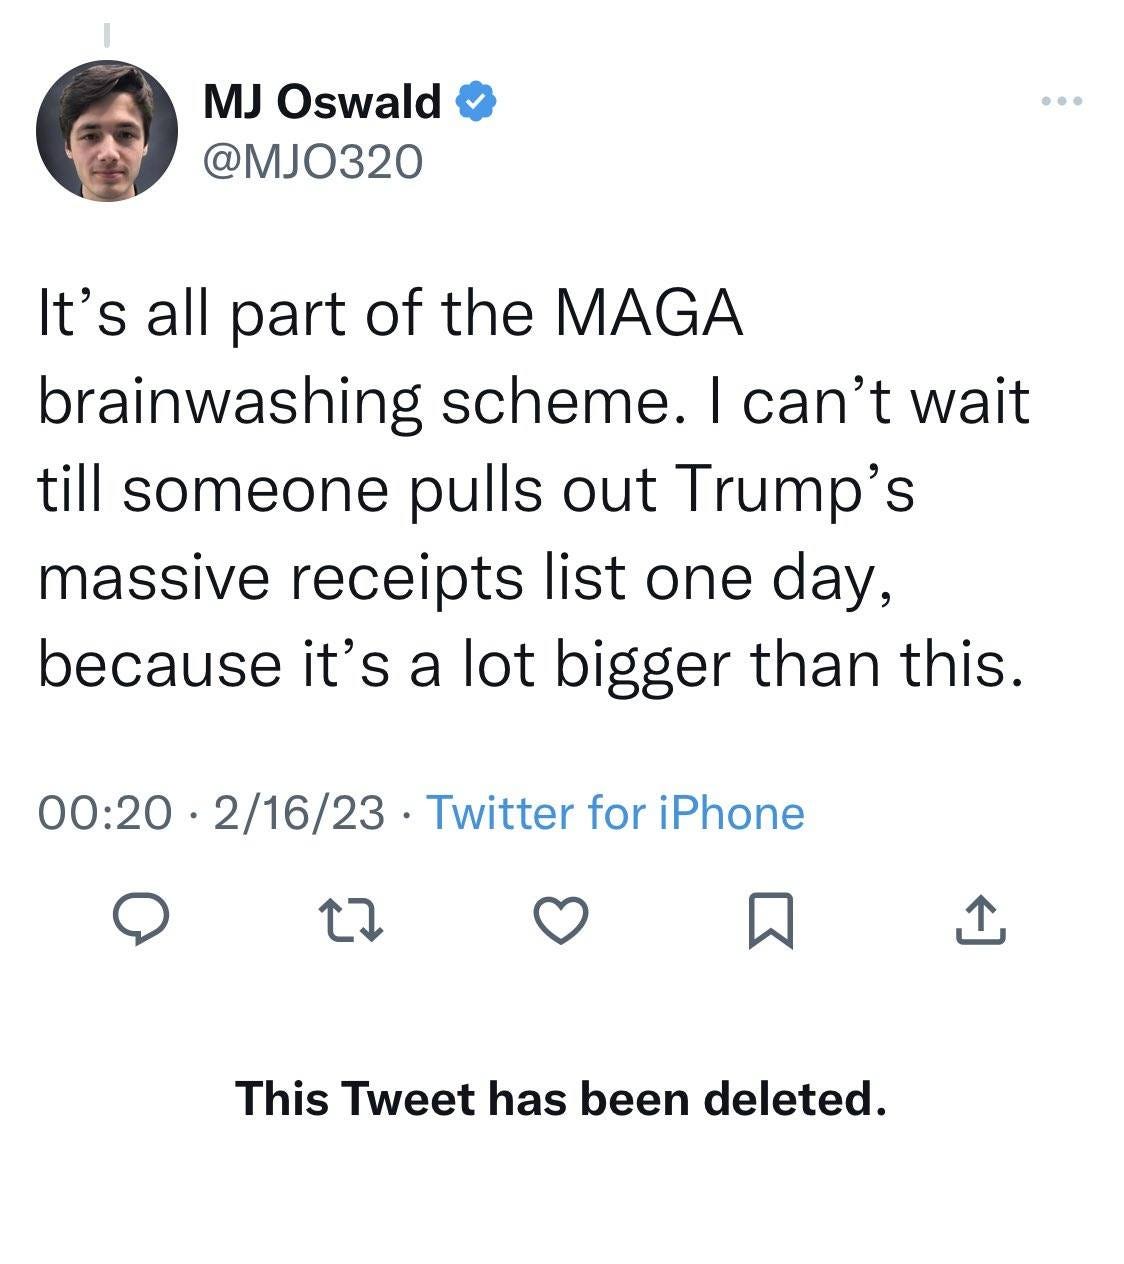 May be a Twitter screenshot of 1 person and text that says 'MJ Oswald @MJO320 It's all part of the MAGA brainwashing scheme. can't wait till someone pulls out Trump's massive receipts list one day, because it's a lot bigger than this. 00:20 2/16/23 Twitter for iPhone × This Tweet has been deleted.'